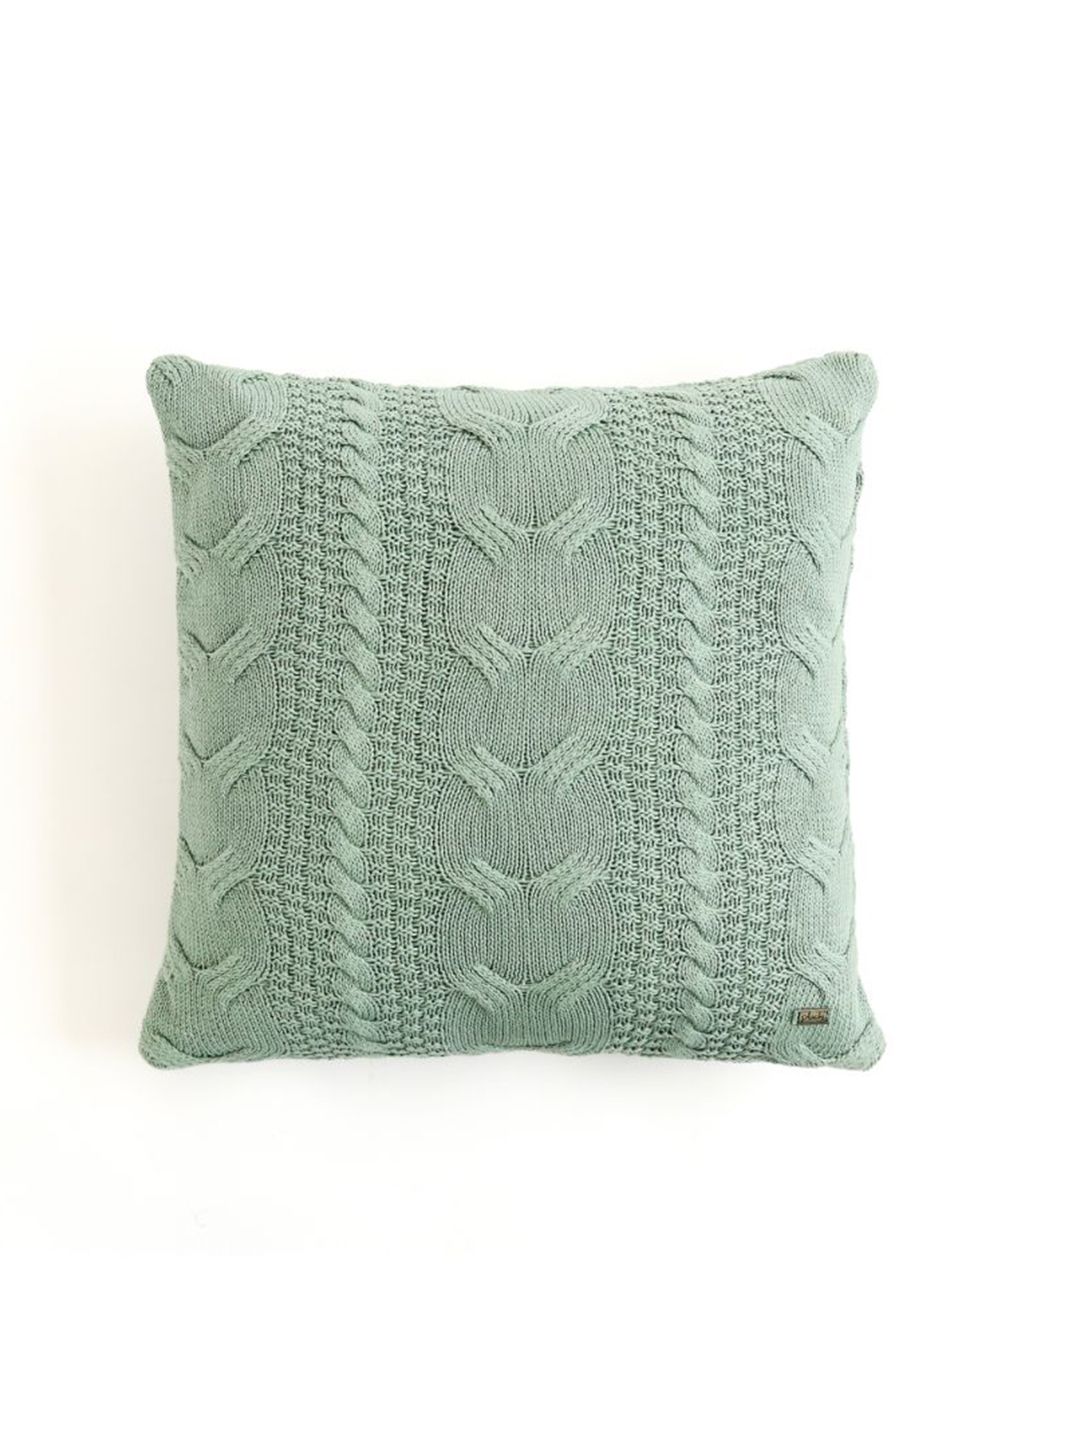 Pluchi Green Geometric Square Pure Cotton Knitted Cushion Cover Price in India